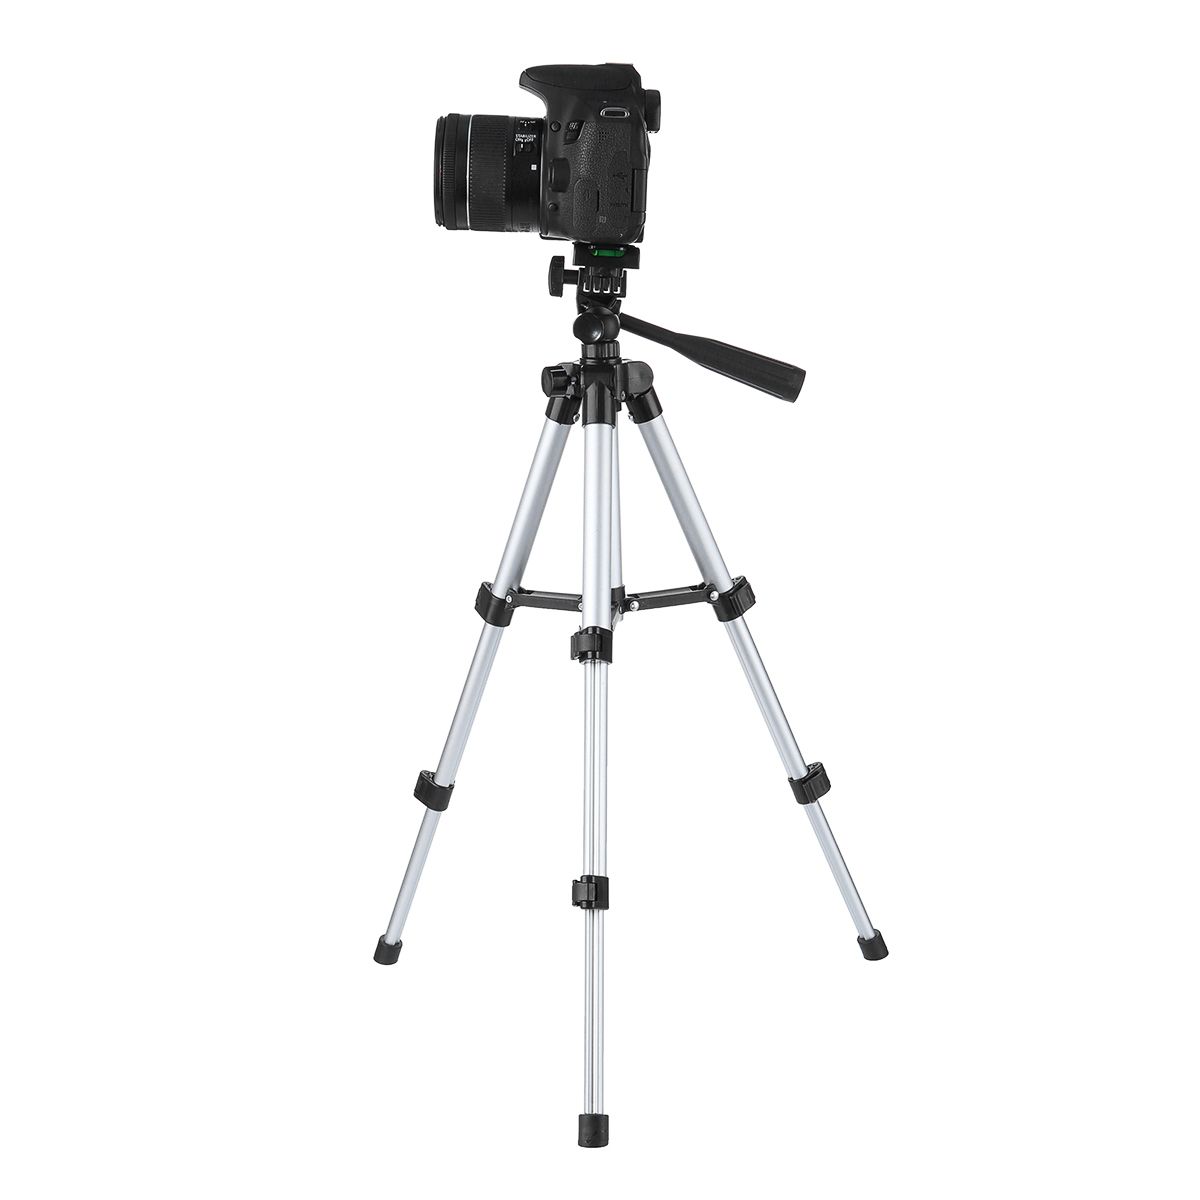 Portable-Extendable-Adjustable-Camera-Projector-Tripod-Stand-Studio-for-DV-Camcorder-Smartphone-Acti-1632650